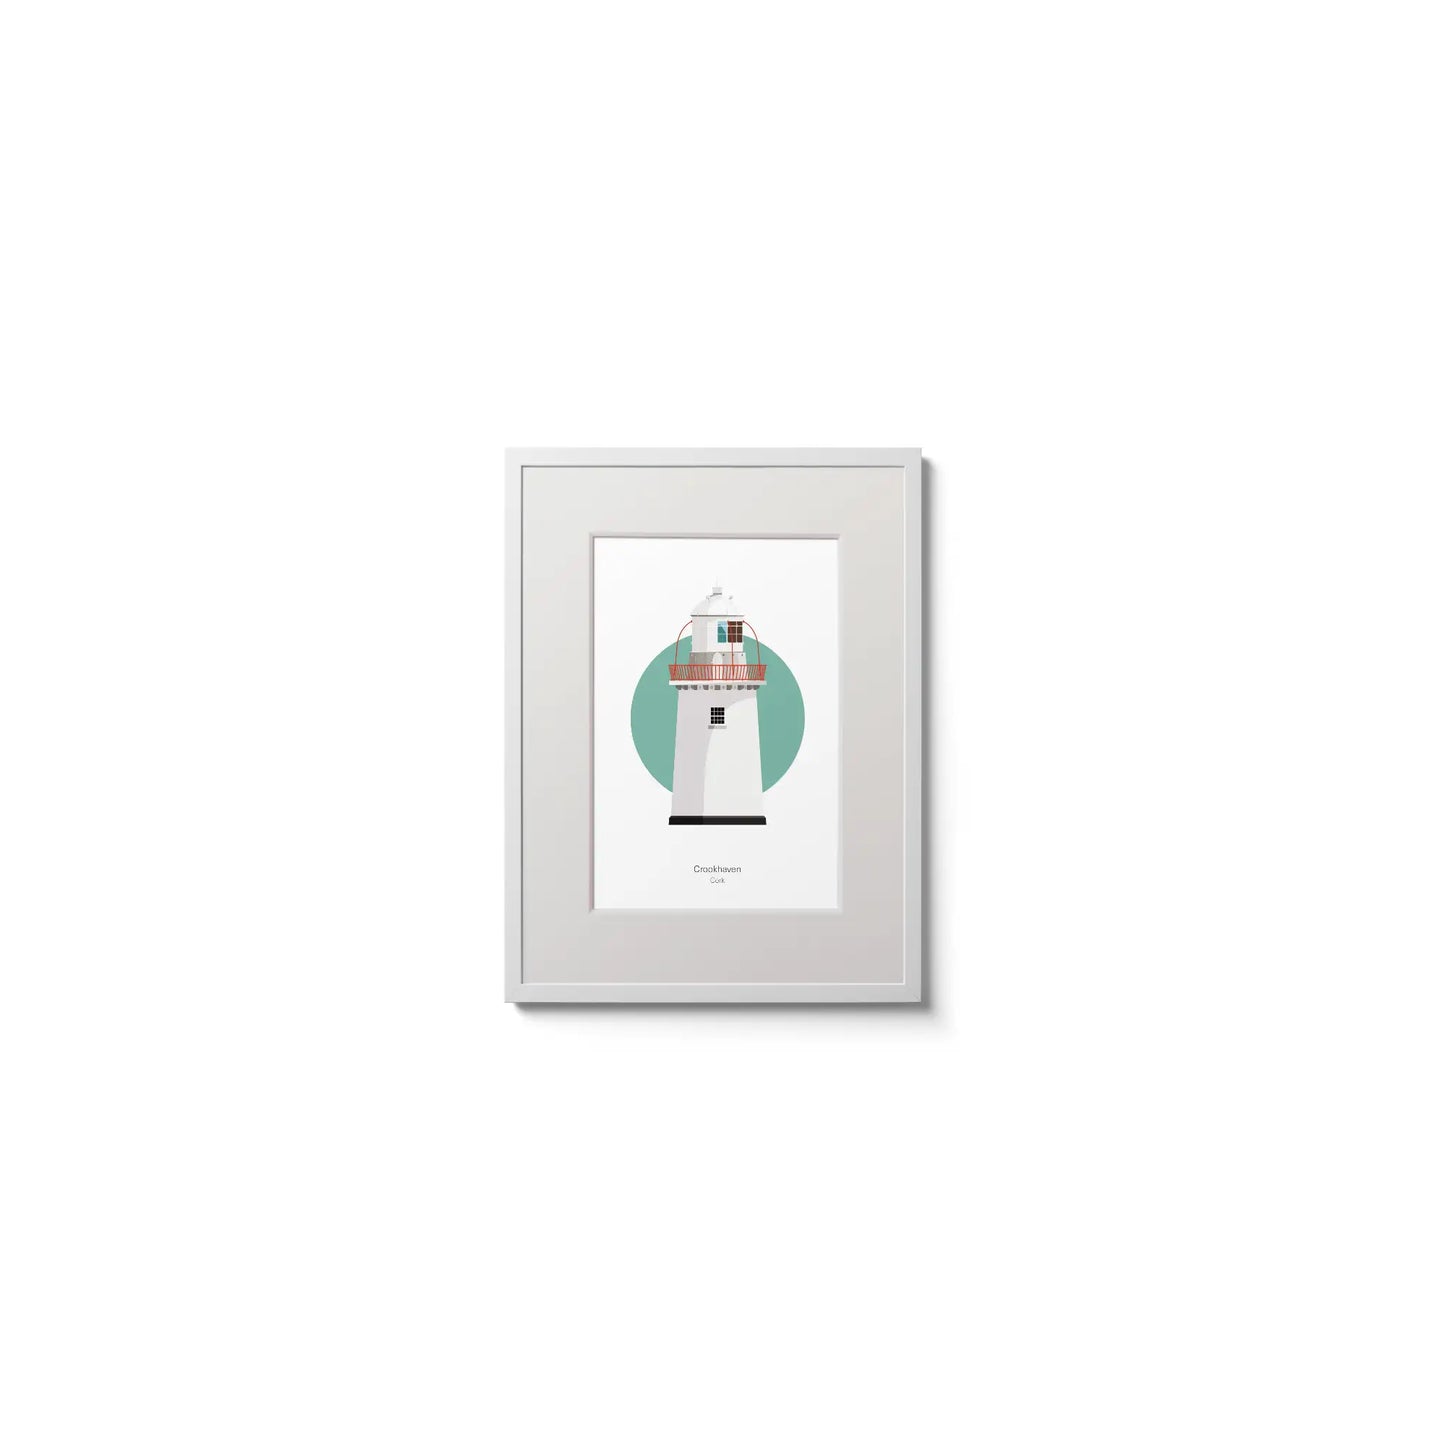 Illustration of Crookhaven lighthouse on a white background inside light blue square,  in a white frame measuring 15x20cm.